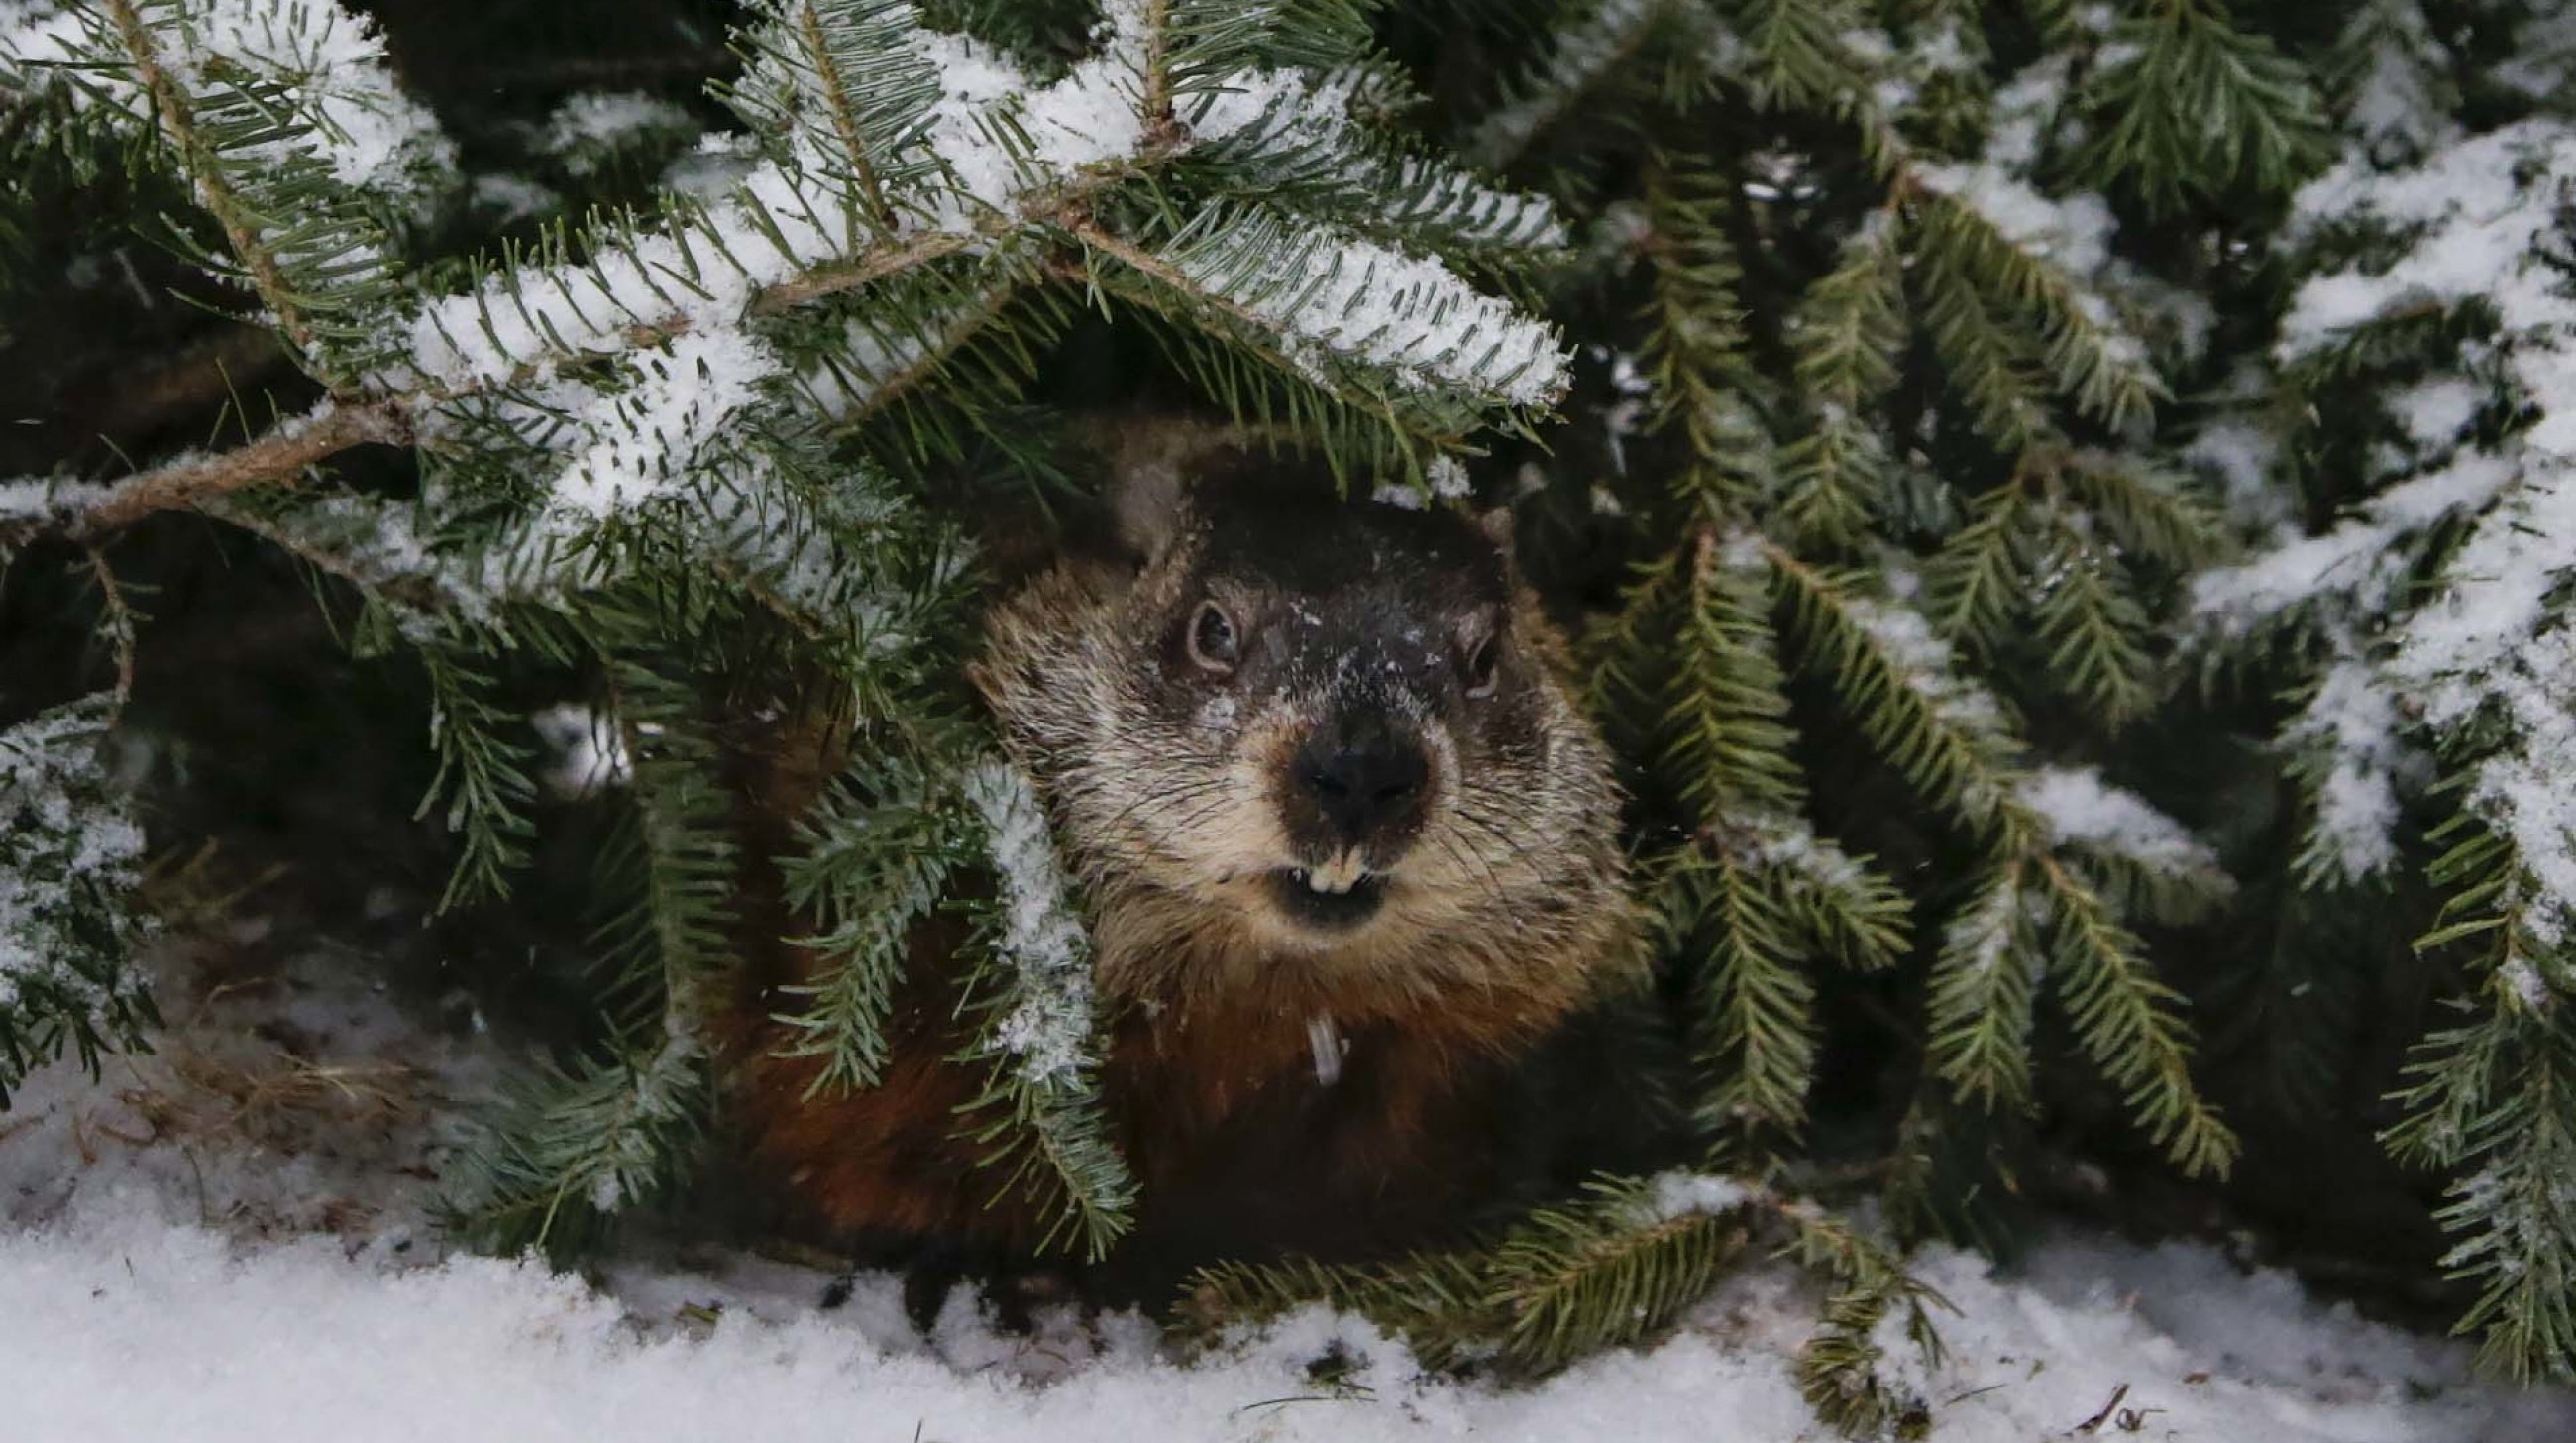 Groundhog Day: Shubenacadie Sam says early spring, Lucy the Lobster says not so fast